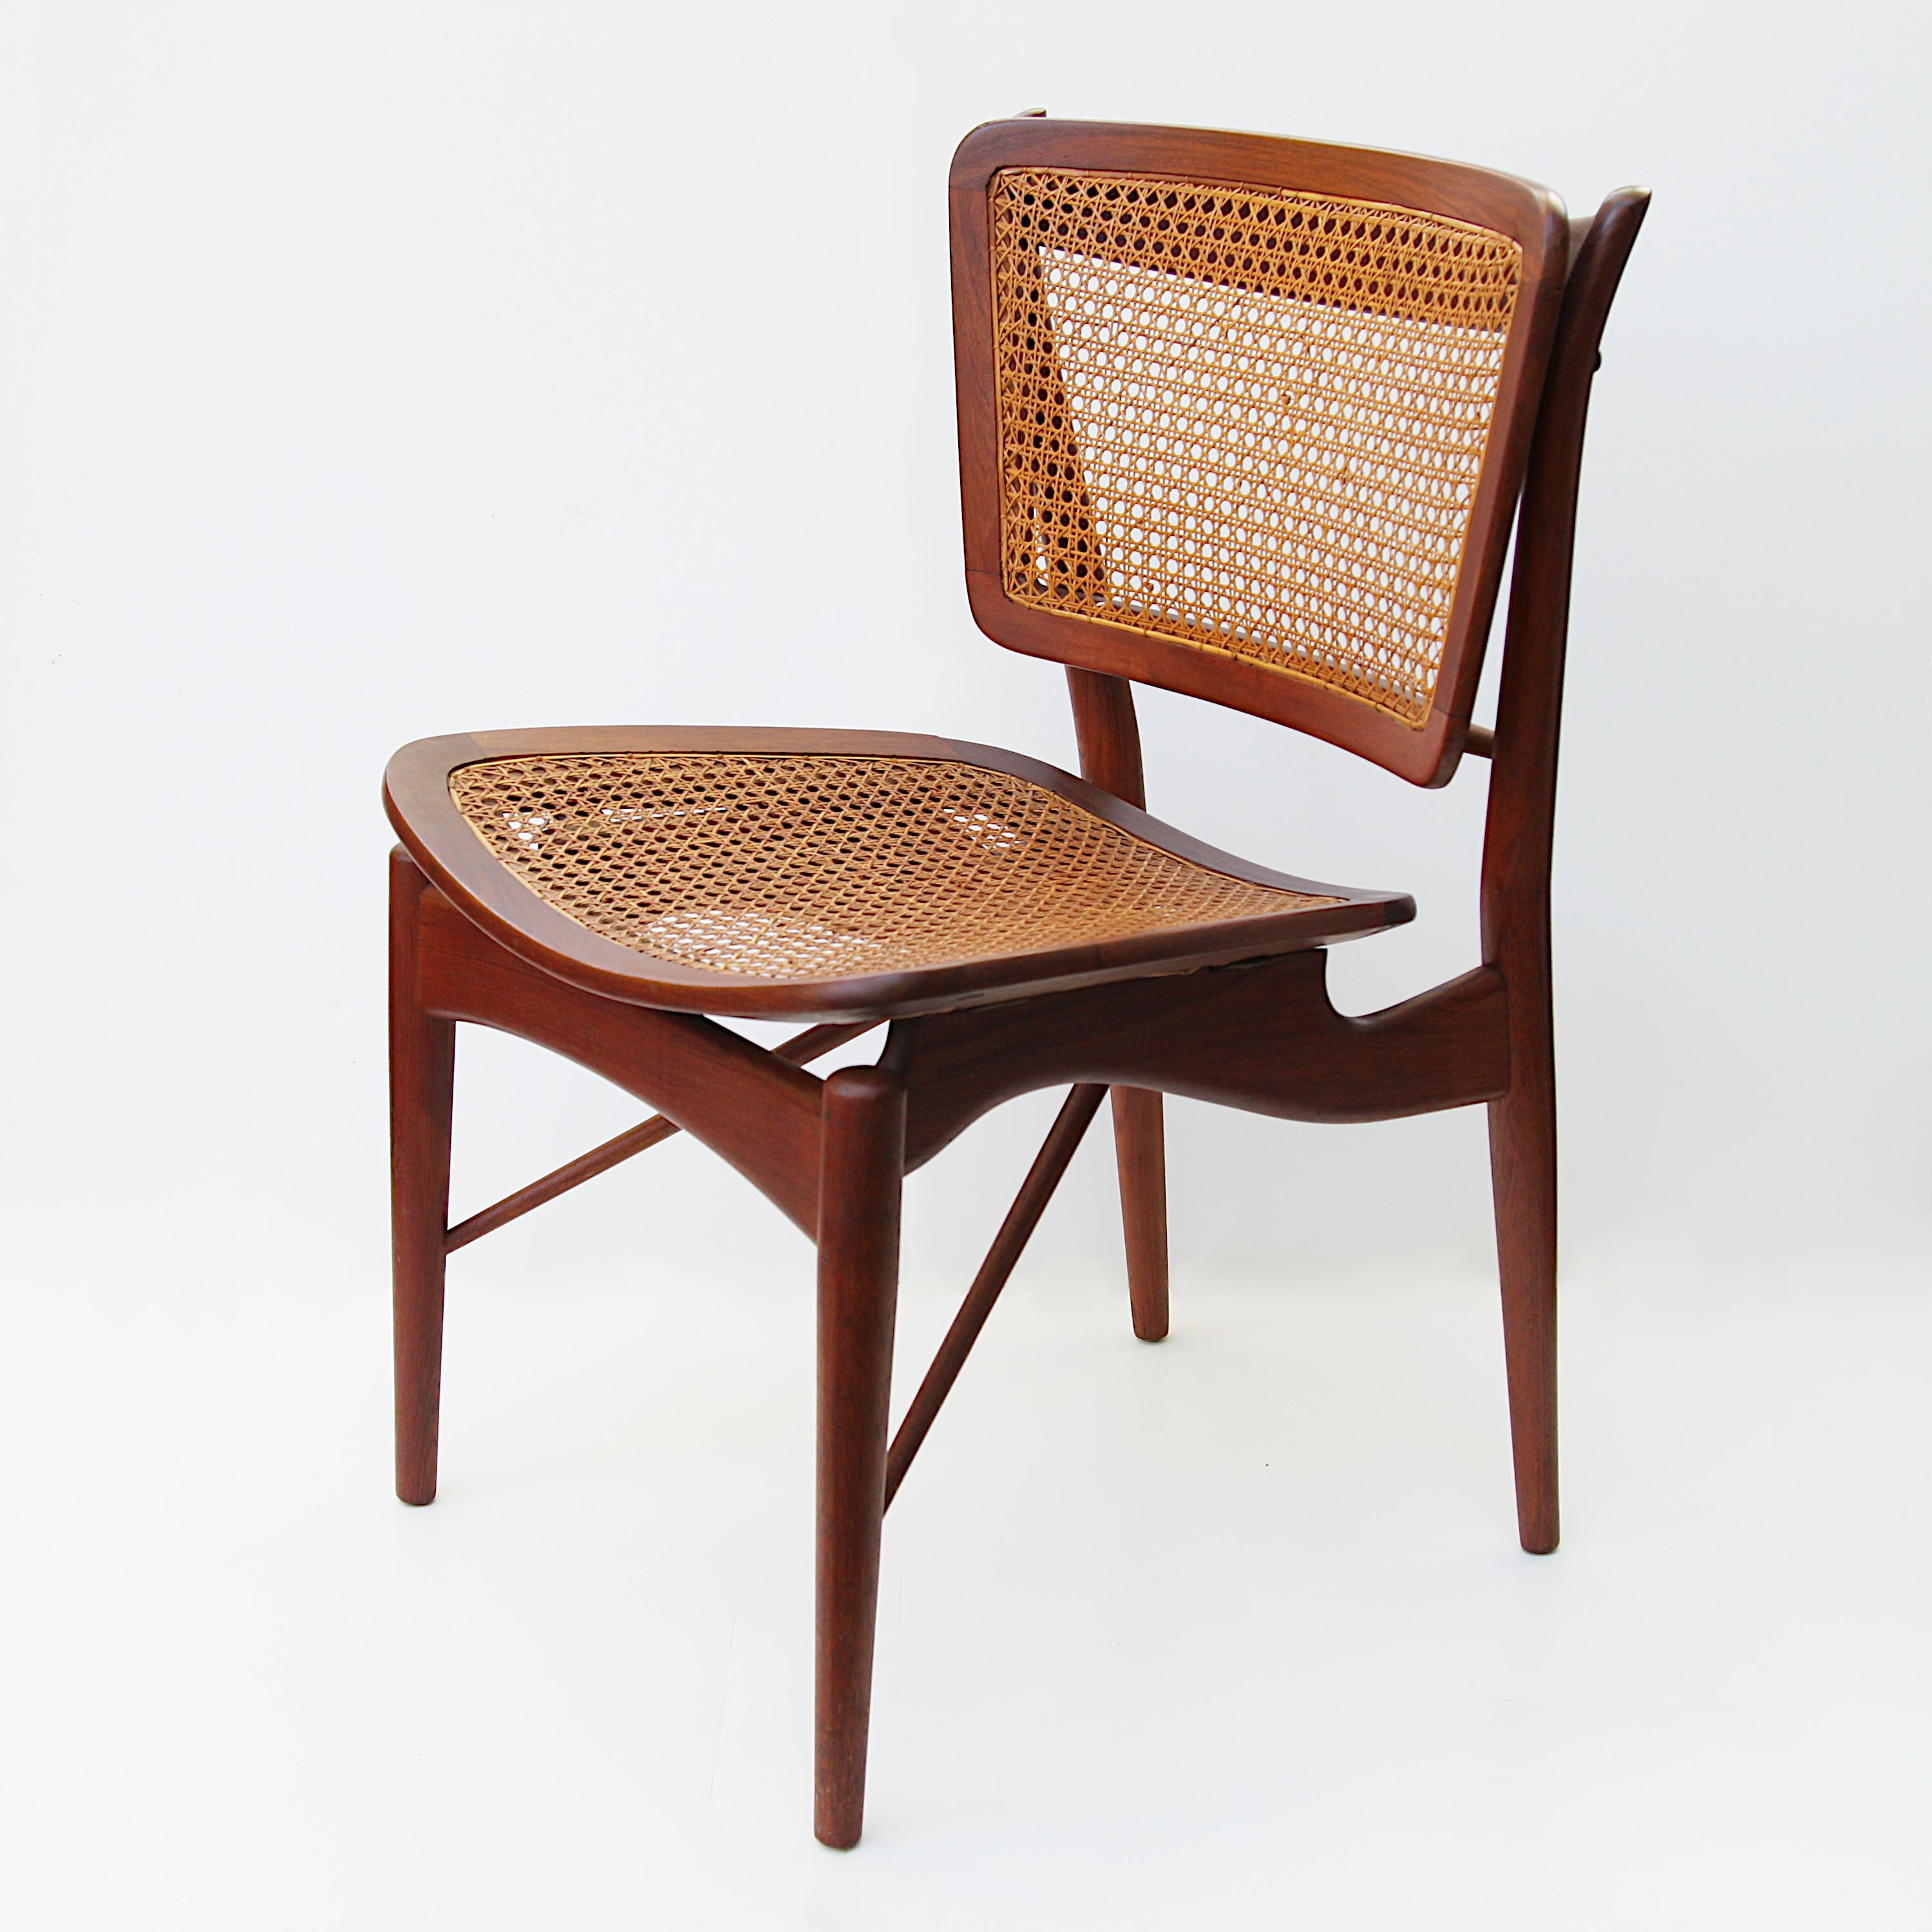 Magnificent Model 51/403 chair designed by Finn Juhl for Baker's Modern line. Chair features beautifully sculpted, solid teak frame and woven cane inserts. This chair is in remarkable original condition with a wonderful patina to the Danish-Oiled